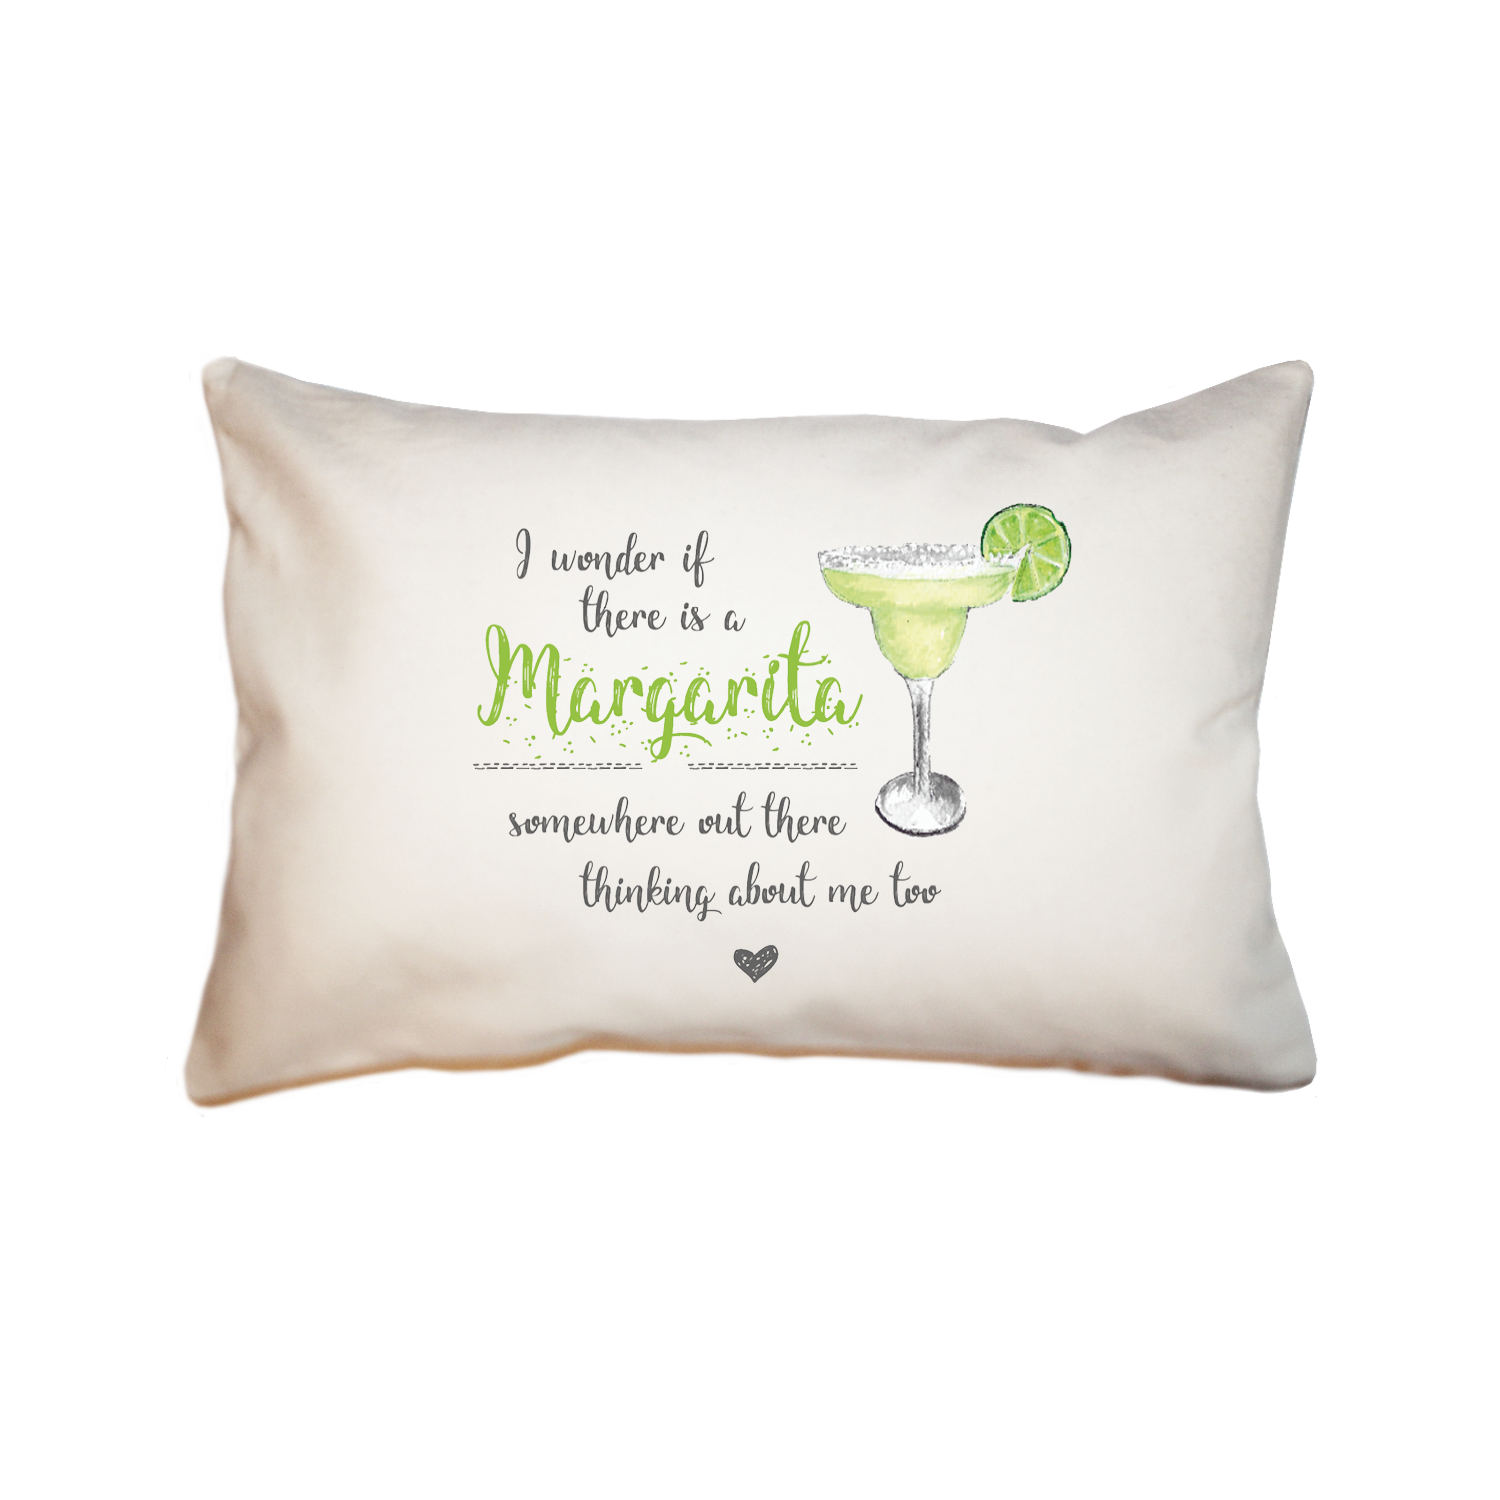 margarita thinking about me too large rectangle pillow